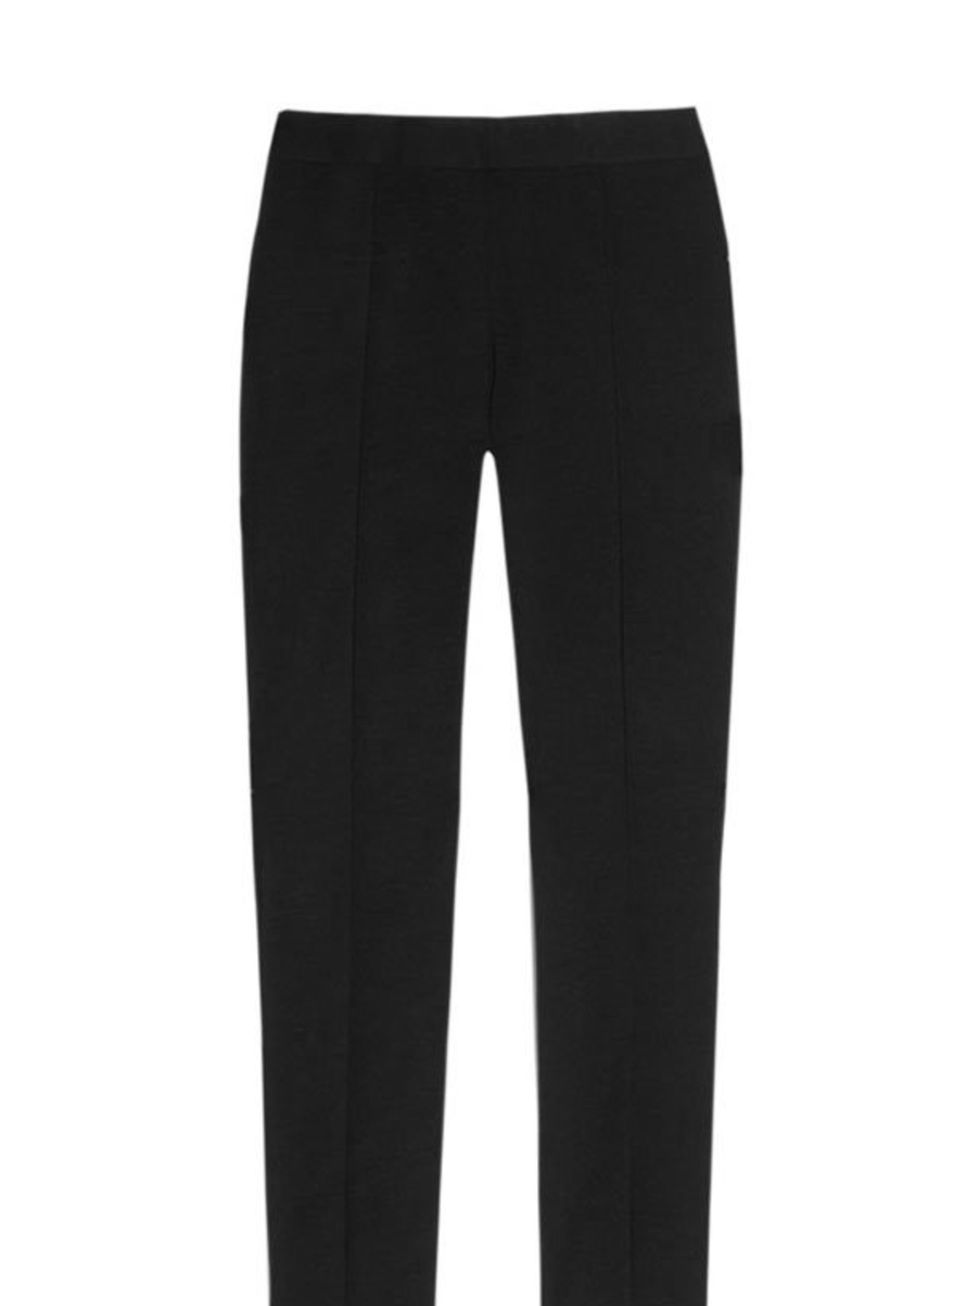 <p>Moschino Cheap &amp; Chic skinny pants, £205, at <a href="http://www.net-a-porter.com/product/177127">Net-a-Porter</a></p>